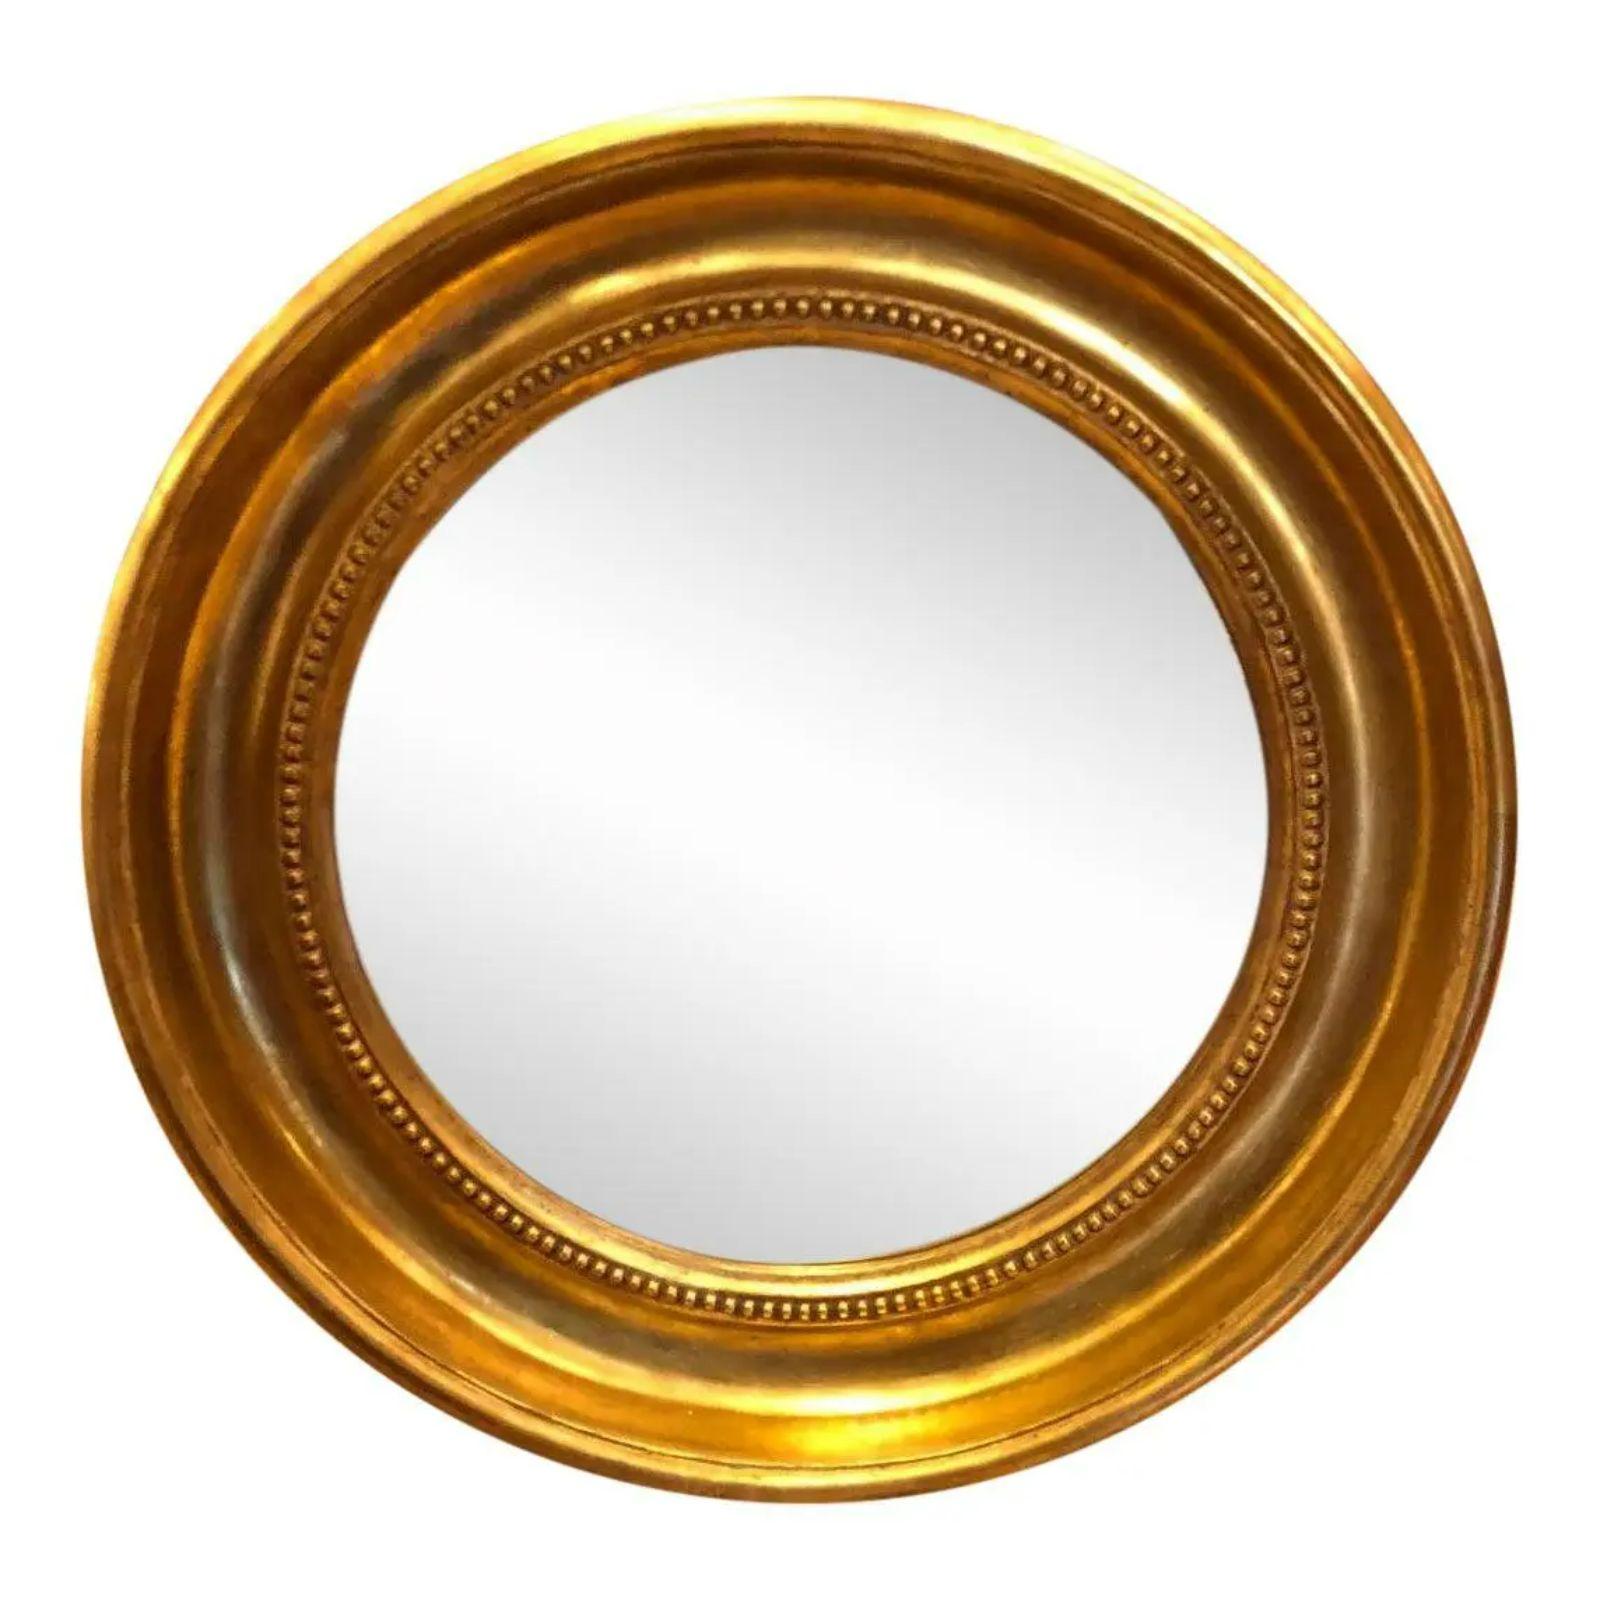 Round Empire Style Gold Mirror by Randy Esada Designs, 2010s For Sale 1